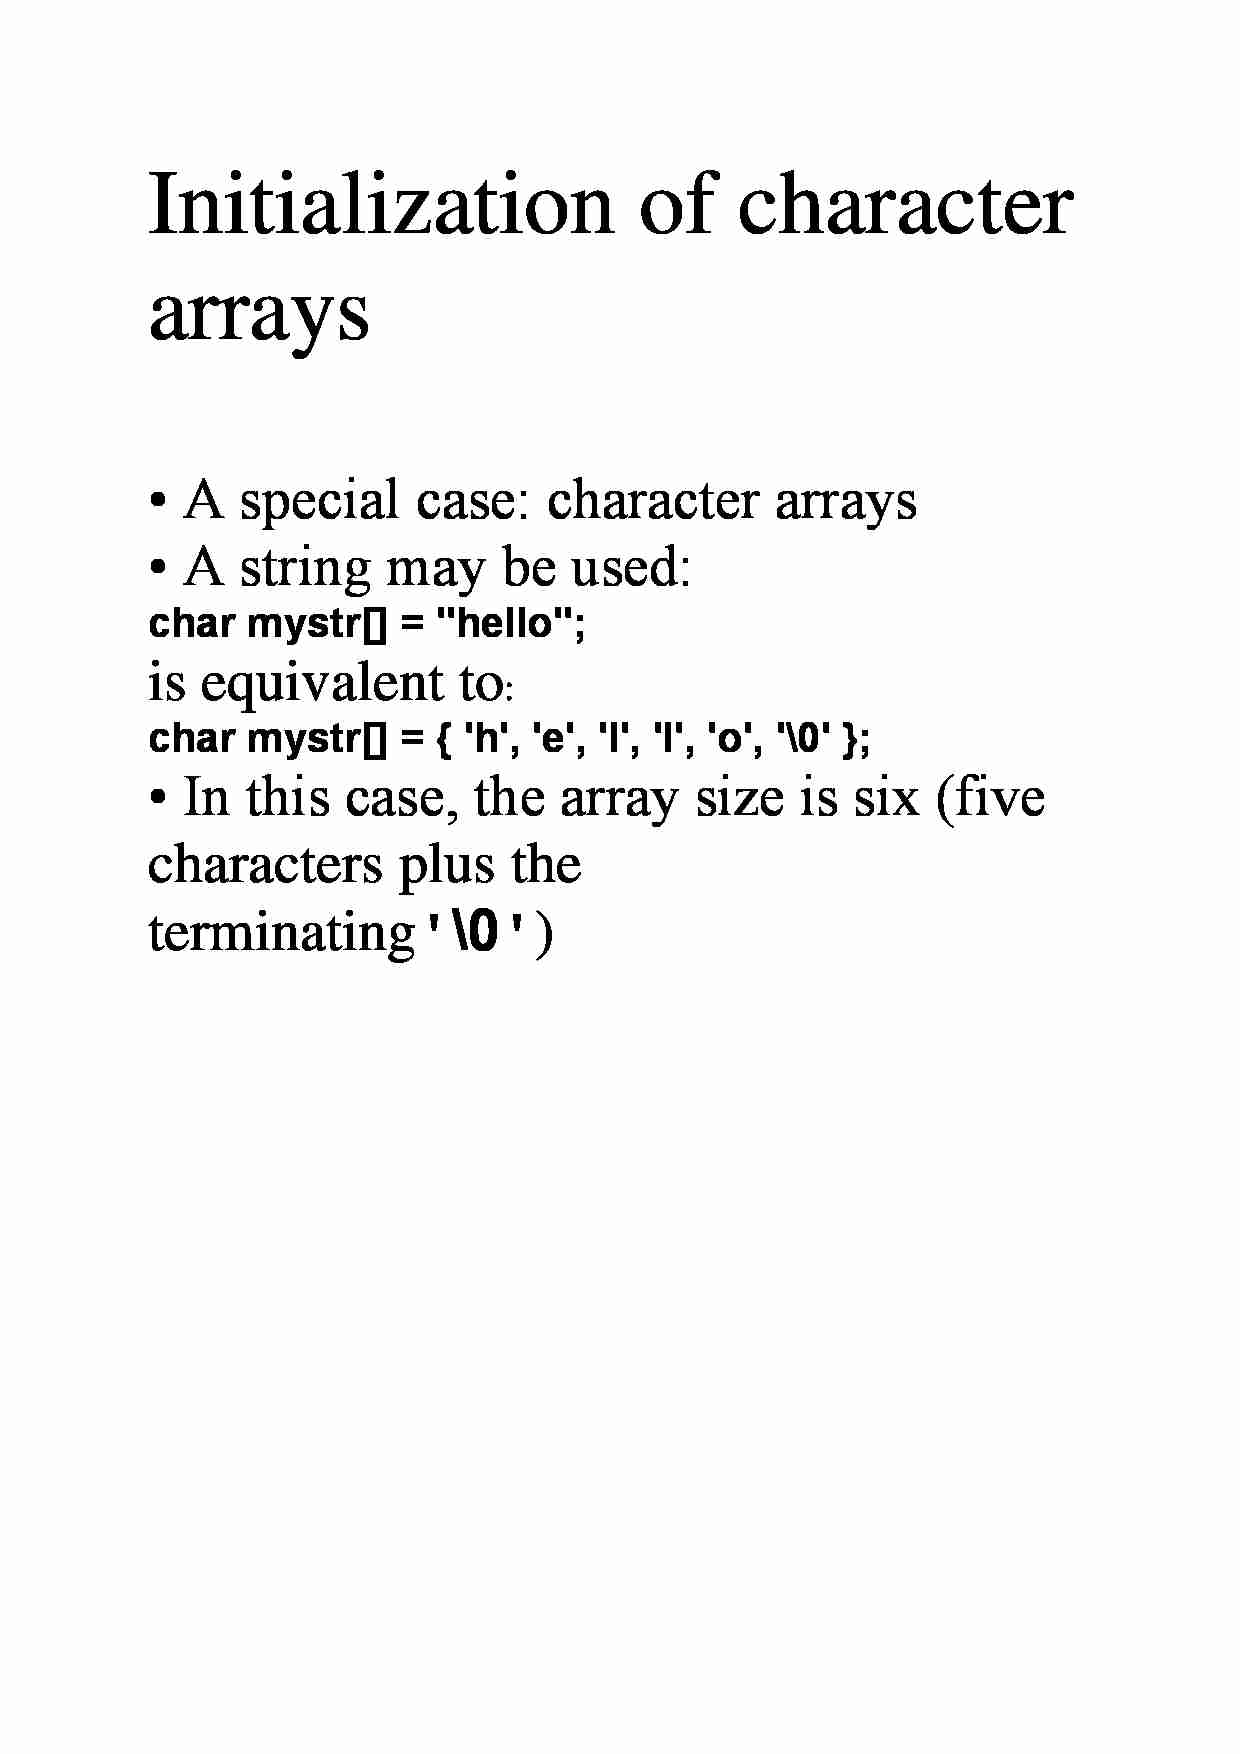 Initialization of character arrays - strona 1